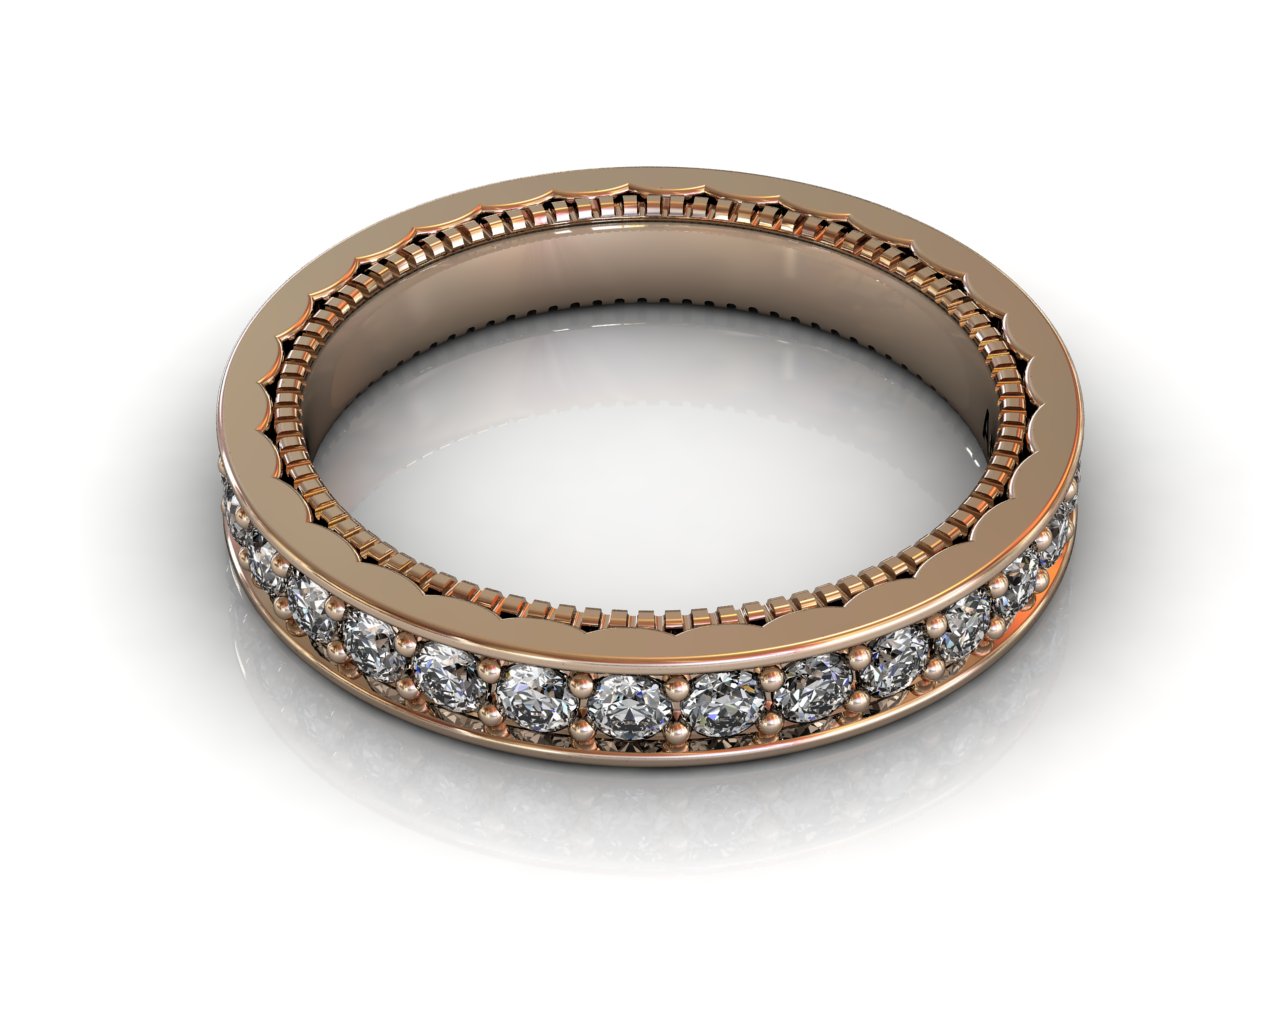 Wedding Bands Ladies Channel Set 30 Stone 0.89 TCW Diamonds 3.92g 18kt Rose Gold - South Bay Gold